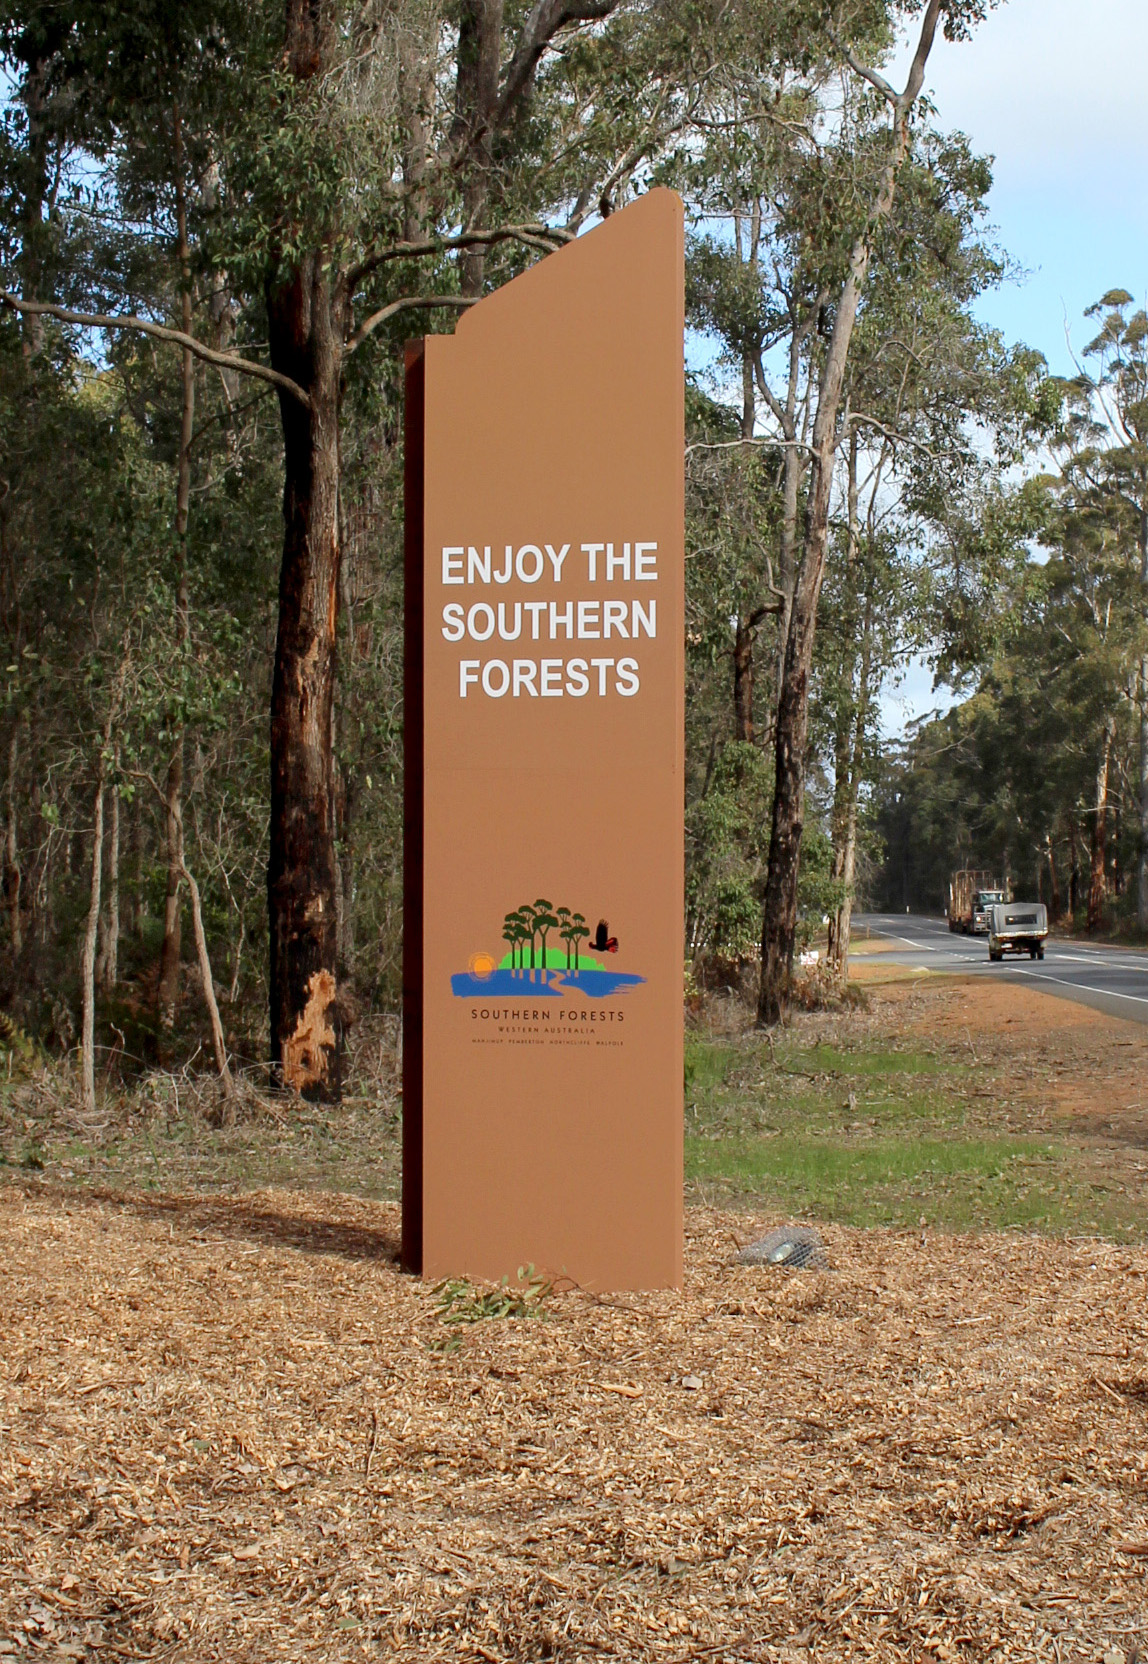 Enjoy the Southern Forest Signage on the way out of Manjimup heading South.